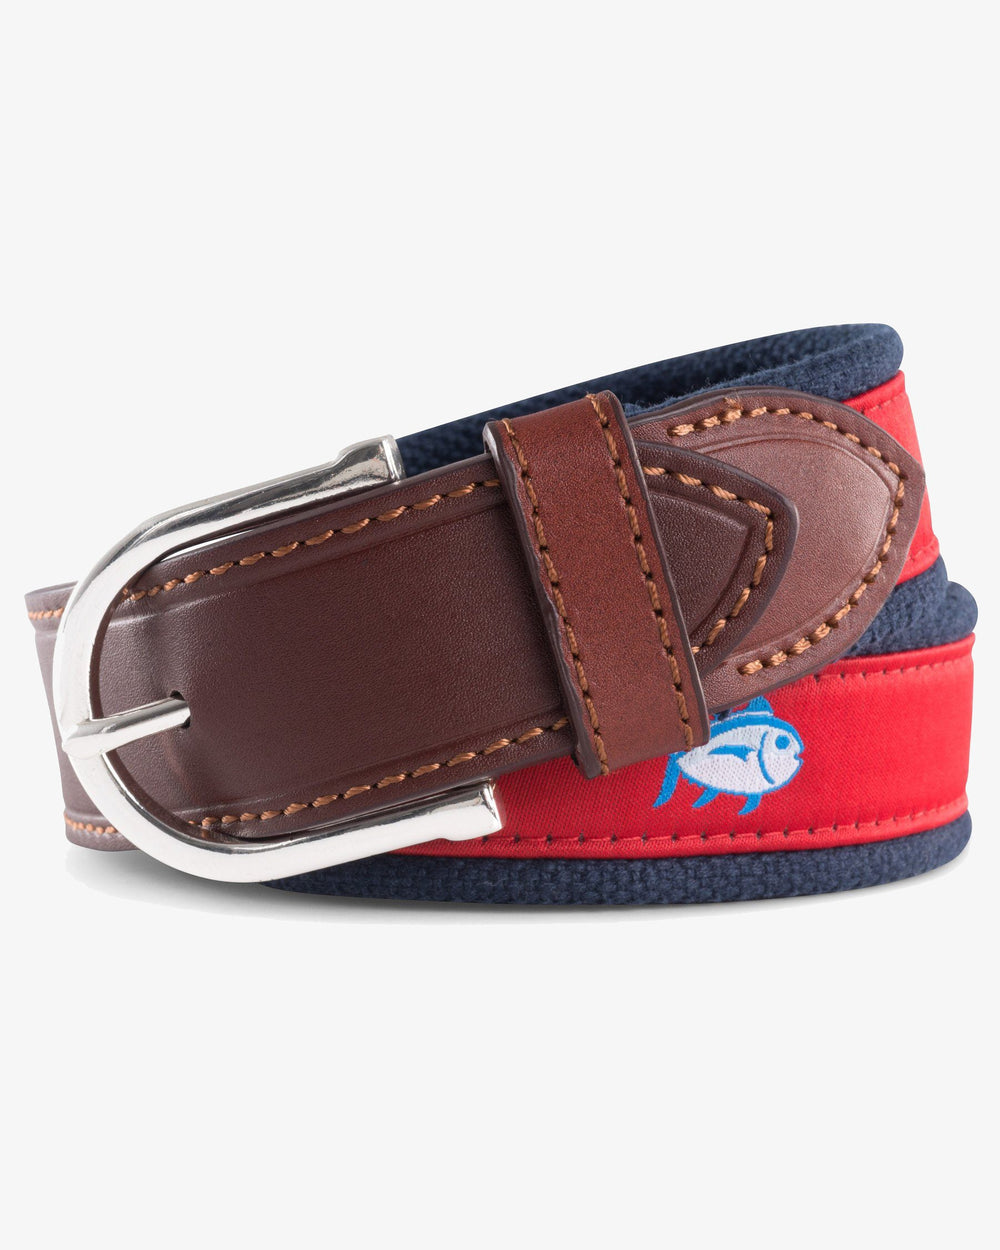 The detail of the Men's Red Skipjack Ribbon Belt by Southern Tide - Crab Red